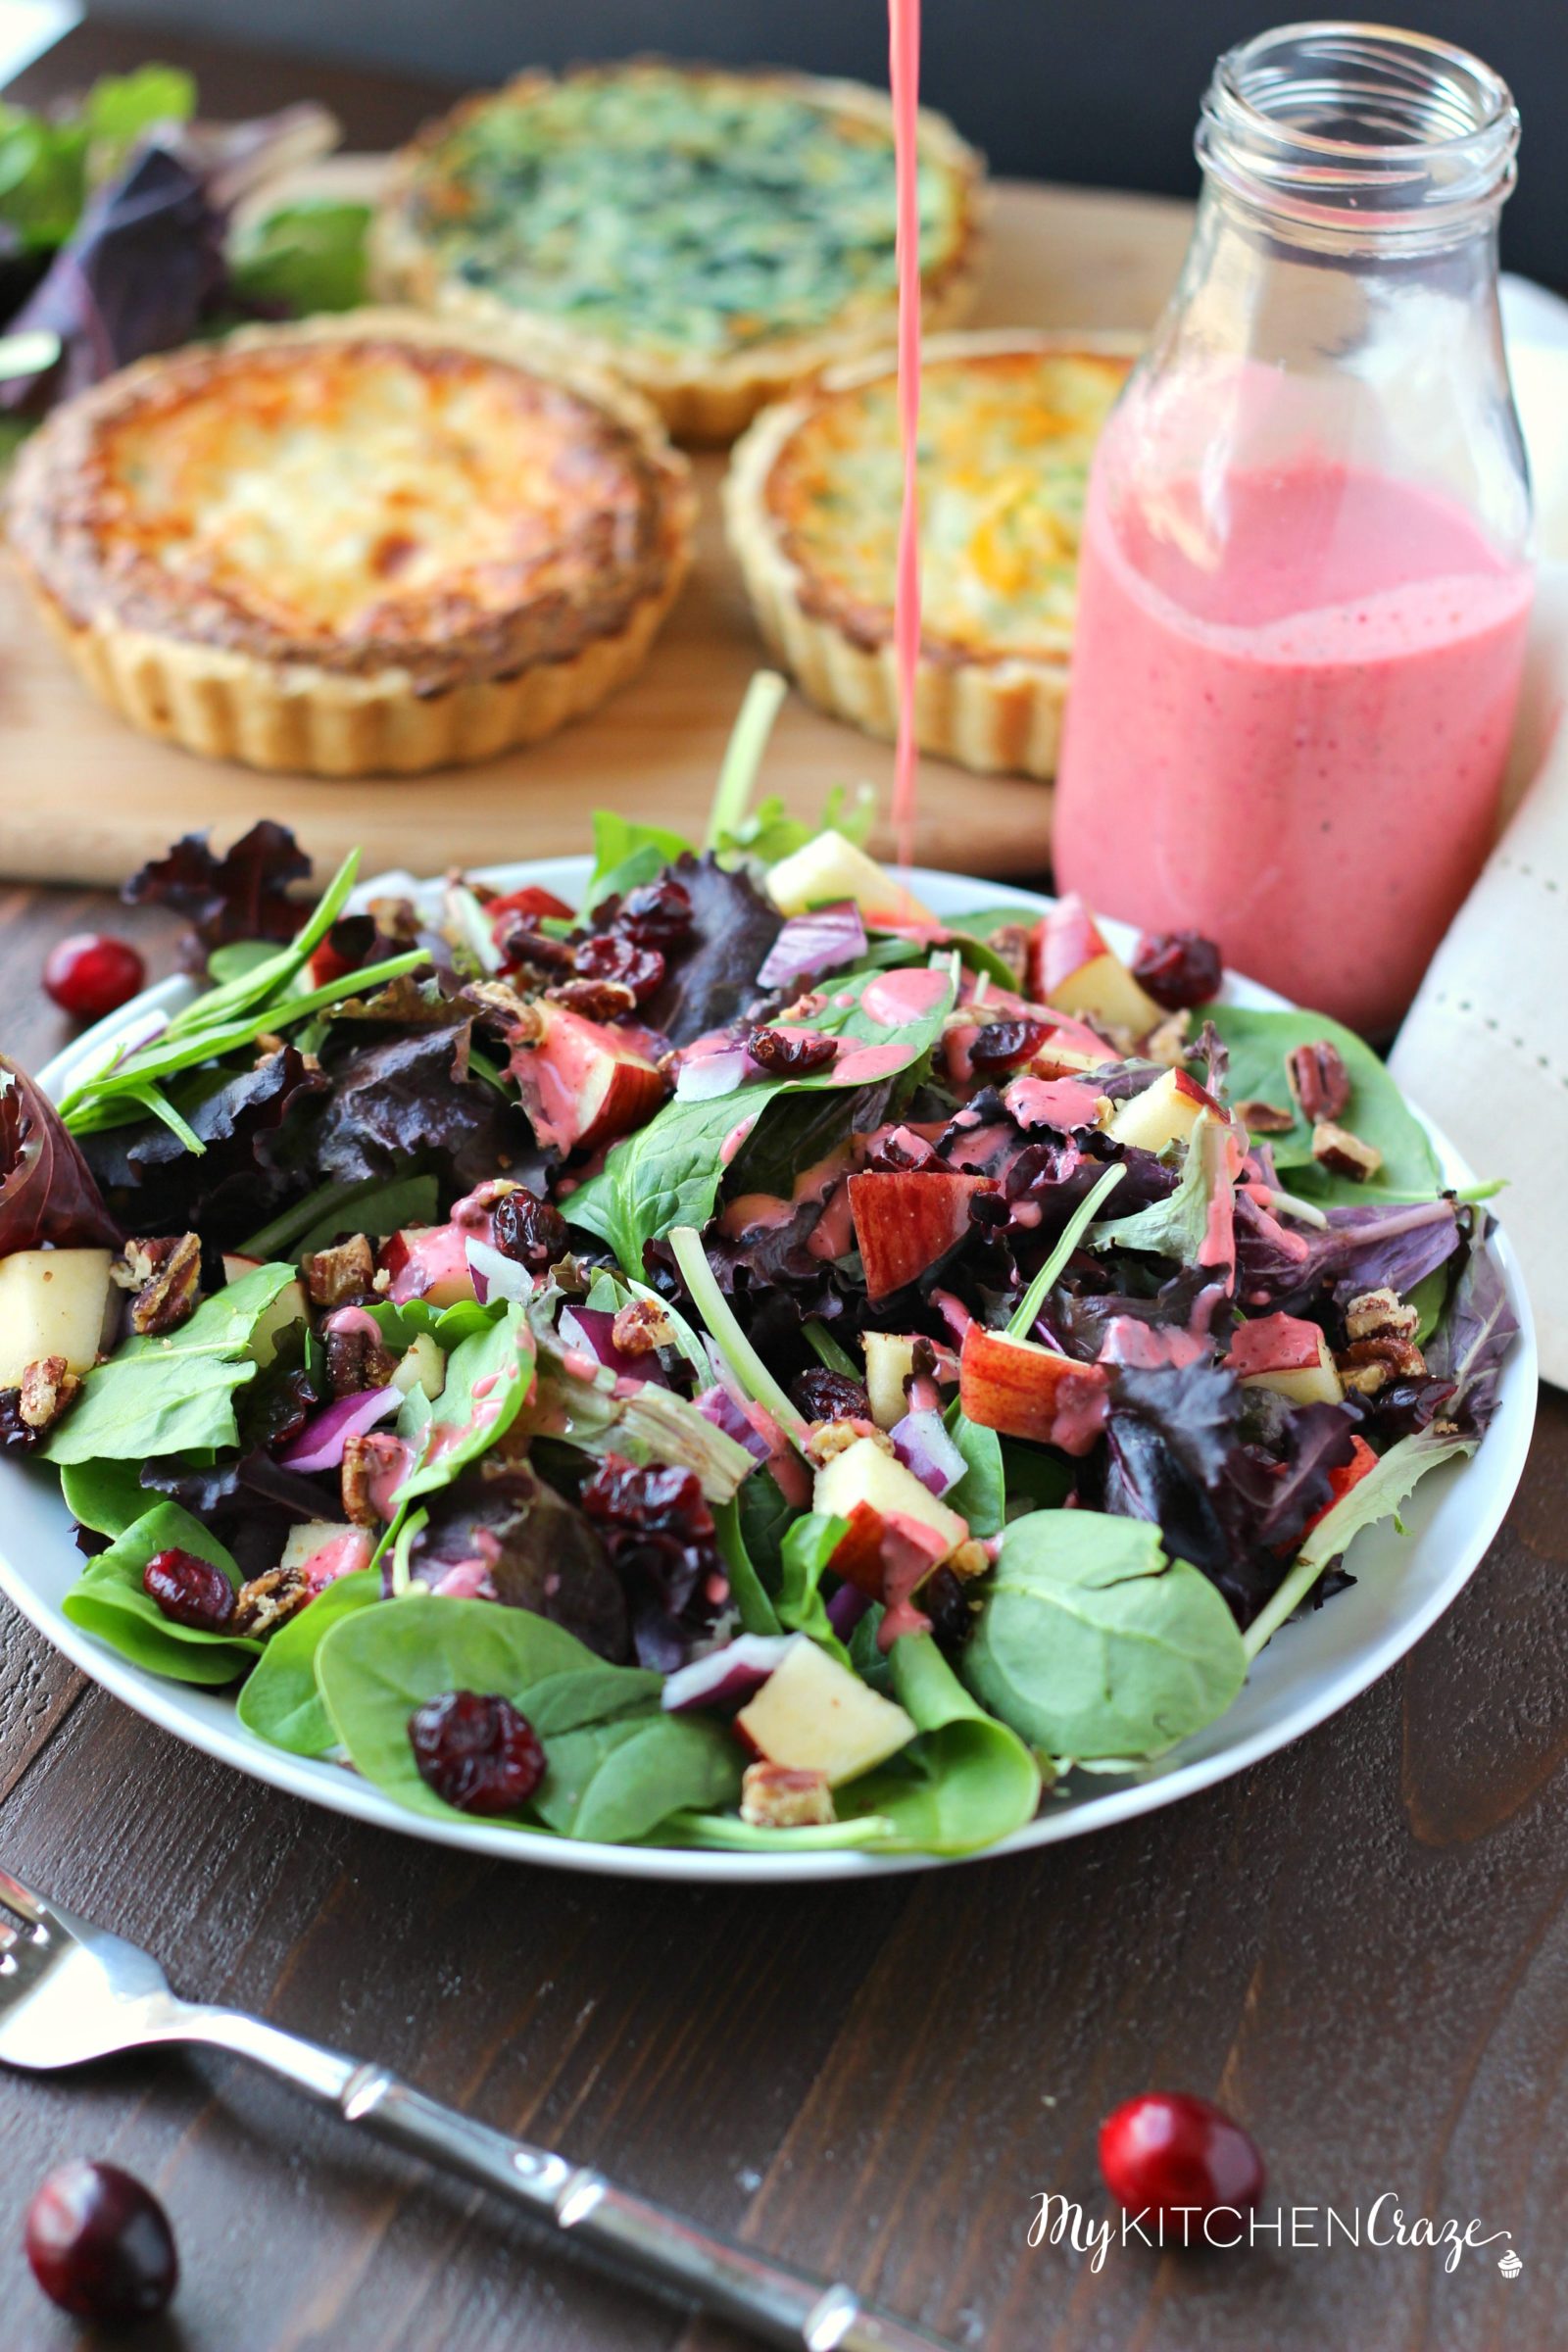 Cranberry Apple Spring Mix Salad ~ mykitchencraze.com ~ Enjoy this delicious holiday spring mix salad. Loaded with apples, pecans, dried cranberries and a decadent cranberry vinaigrette.